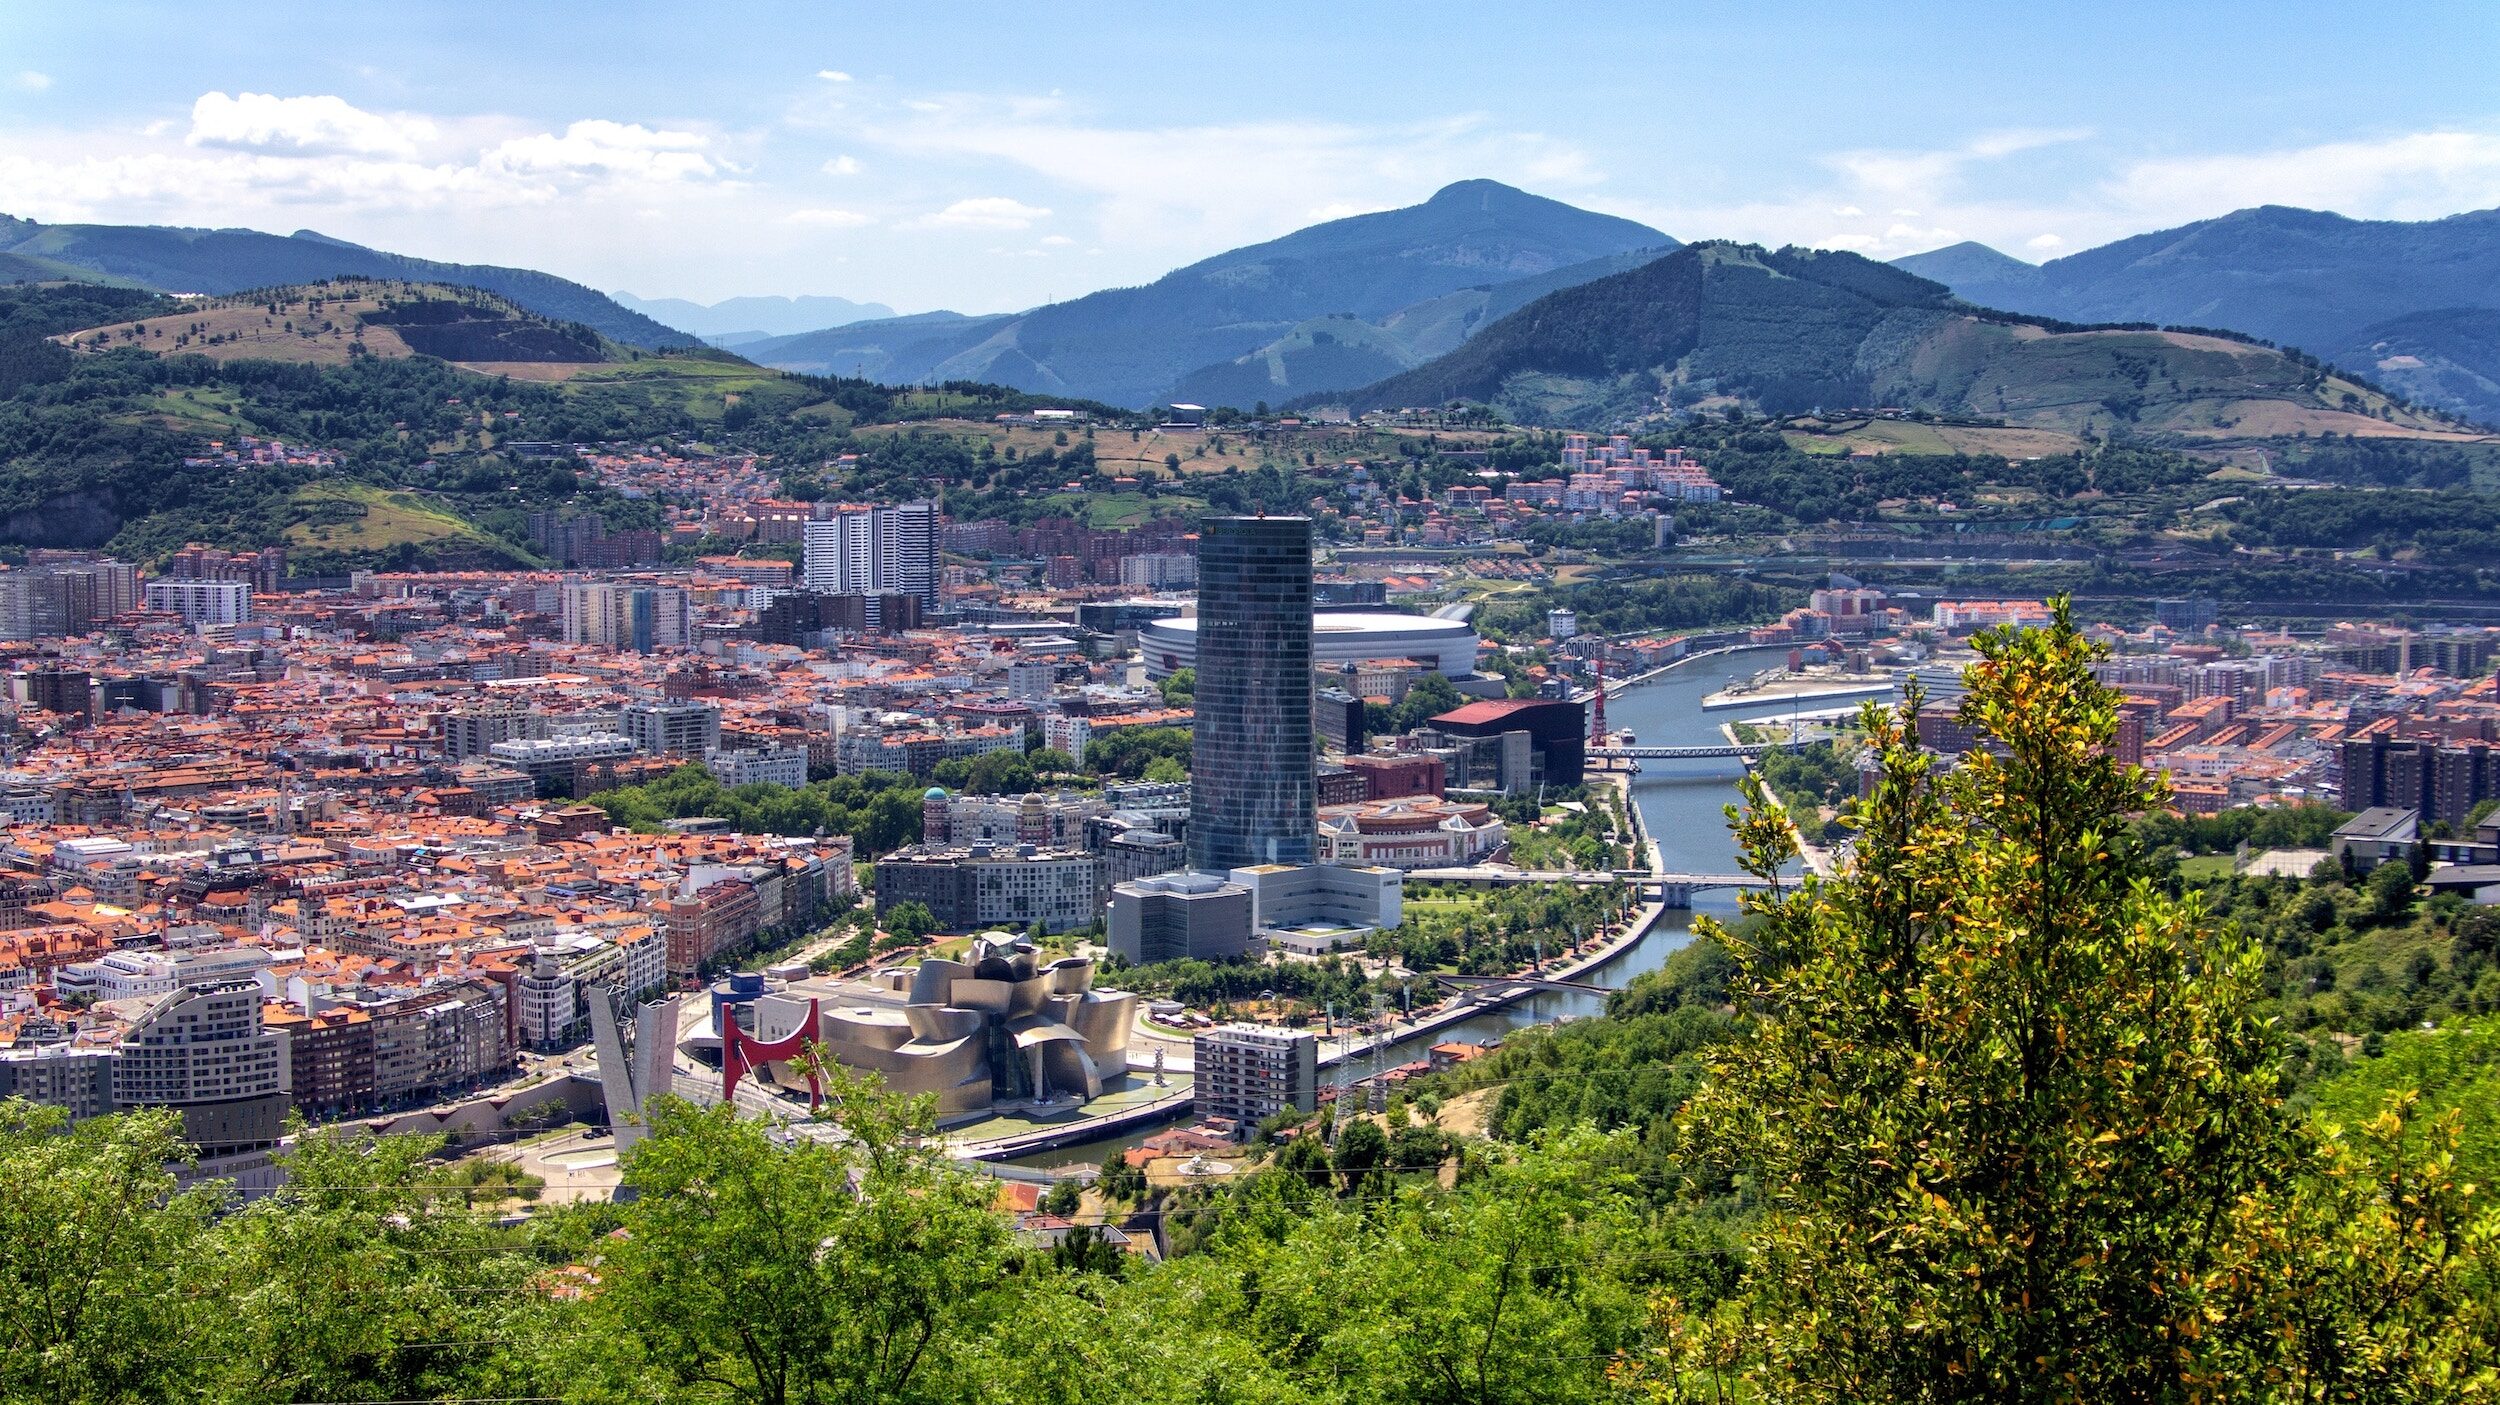 Bilbao: tech hub and growing city for developers